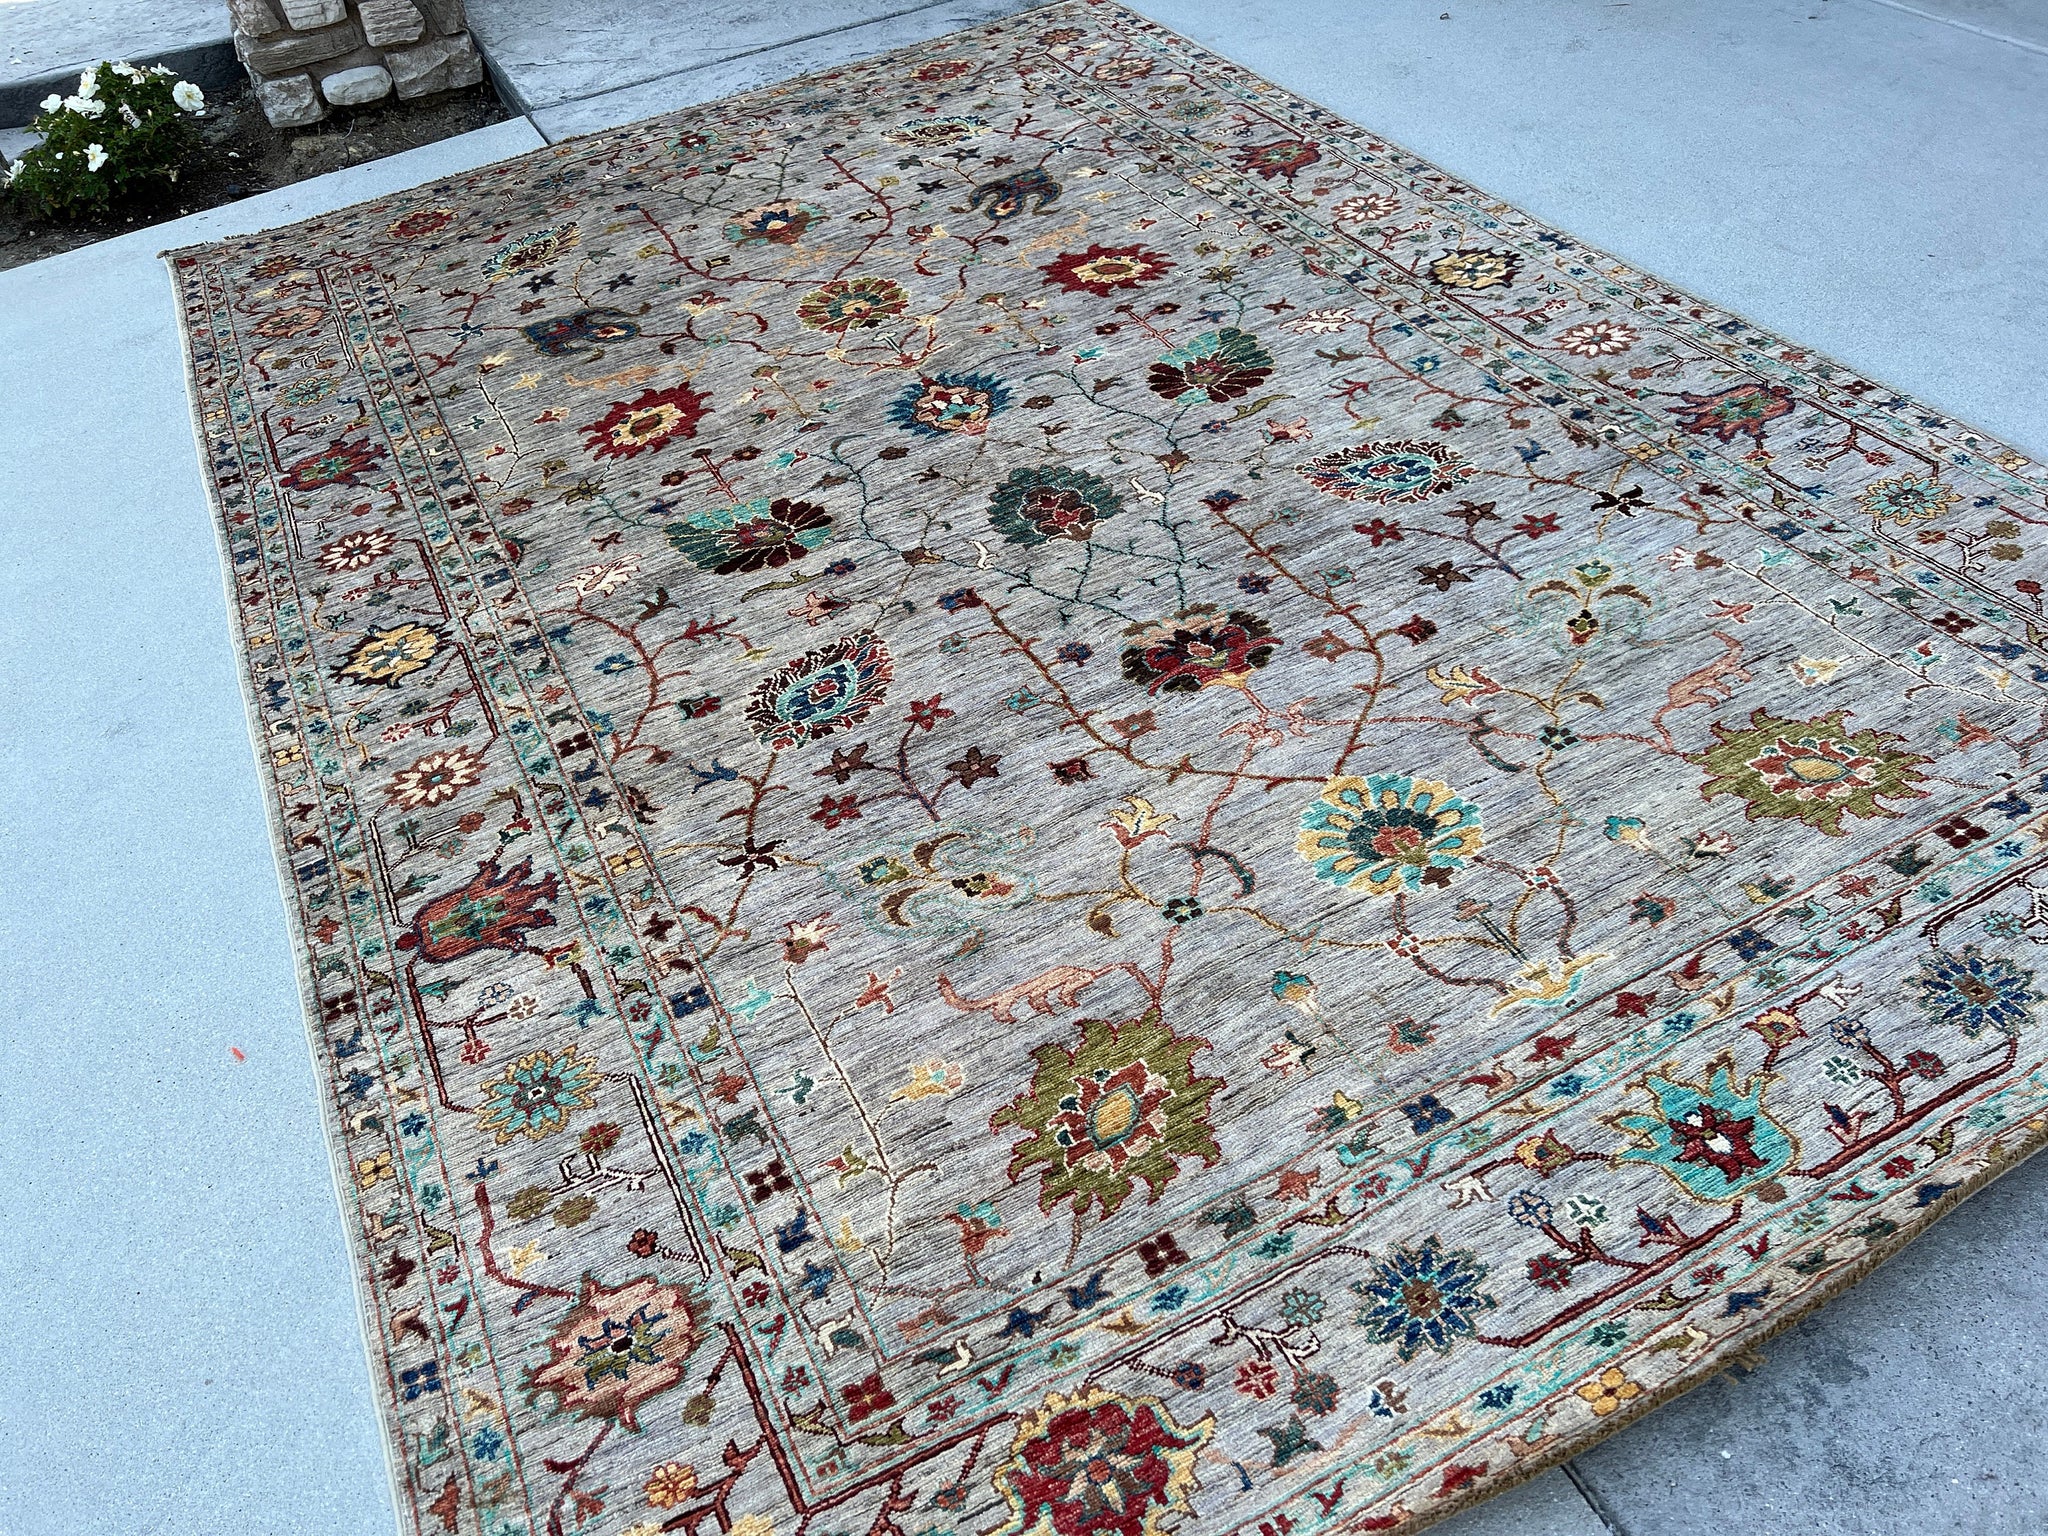 7x10 (215x305) Handmade Afghan Rug | Charcoal Grey Brick Red Teal Turquoise Navy Blue Moss Green Yellow Gold Brown Cream Ivory Beige | Boho